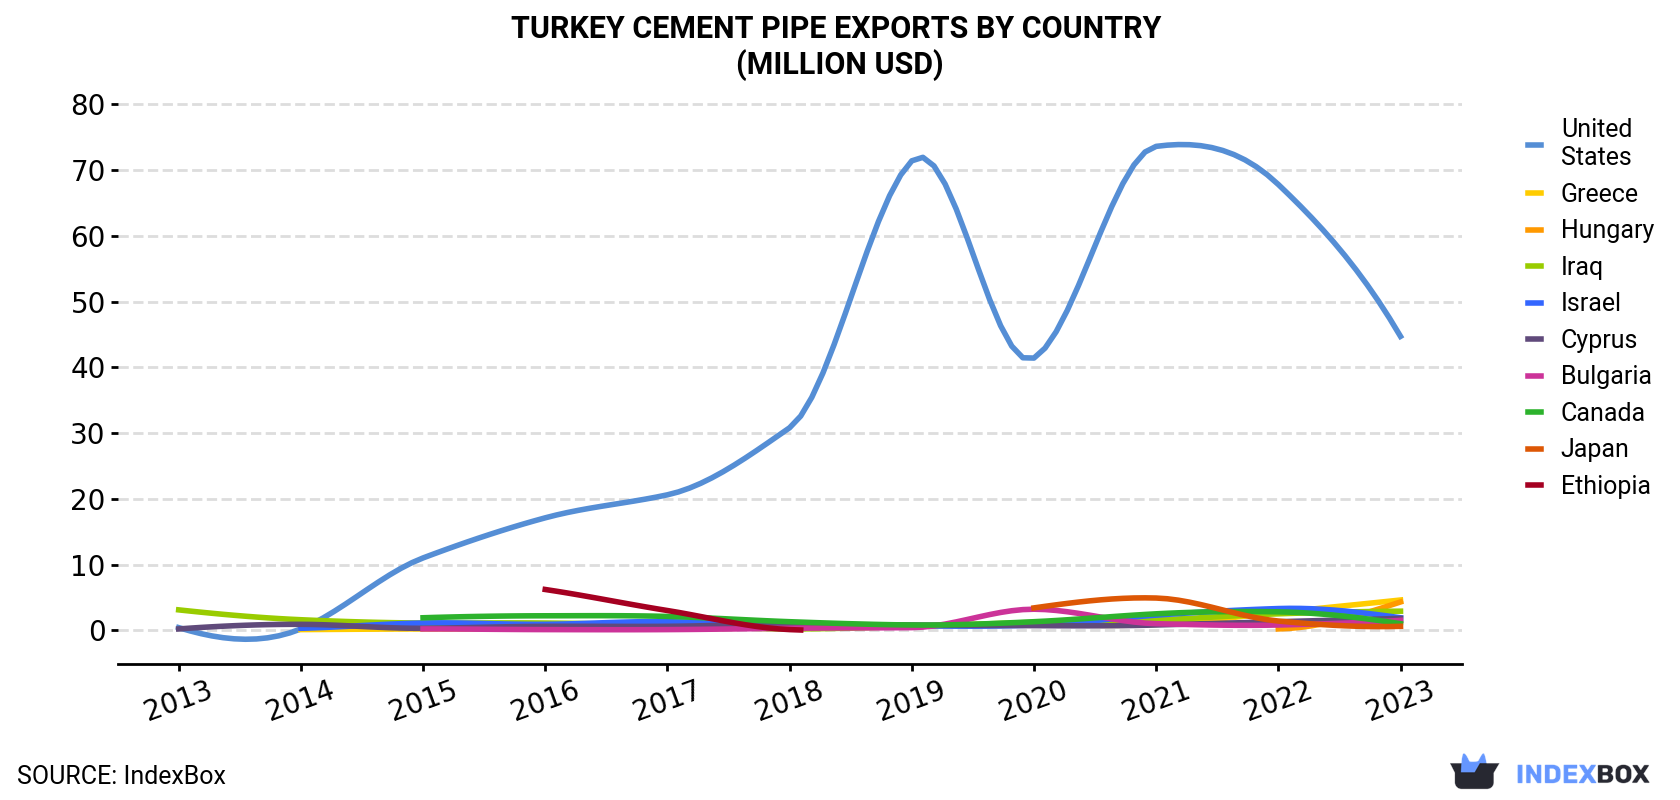 Turkey Cement Pipe Exports By Country (Million USD)